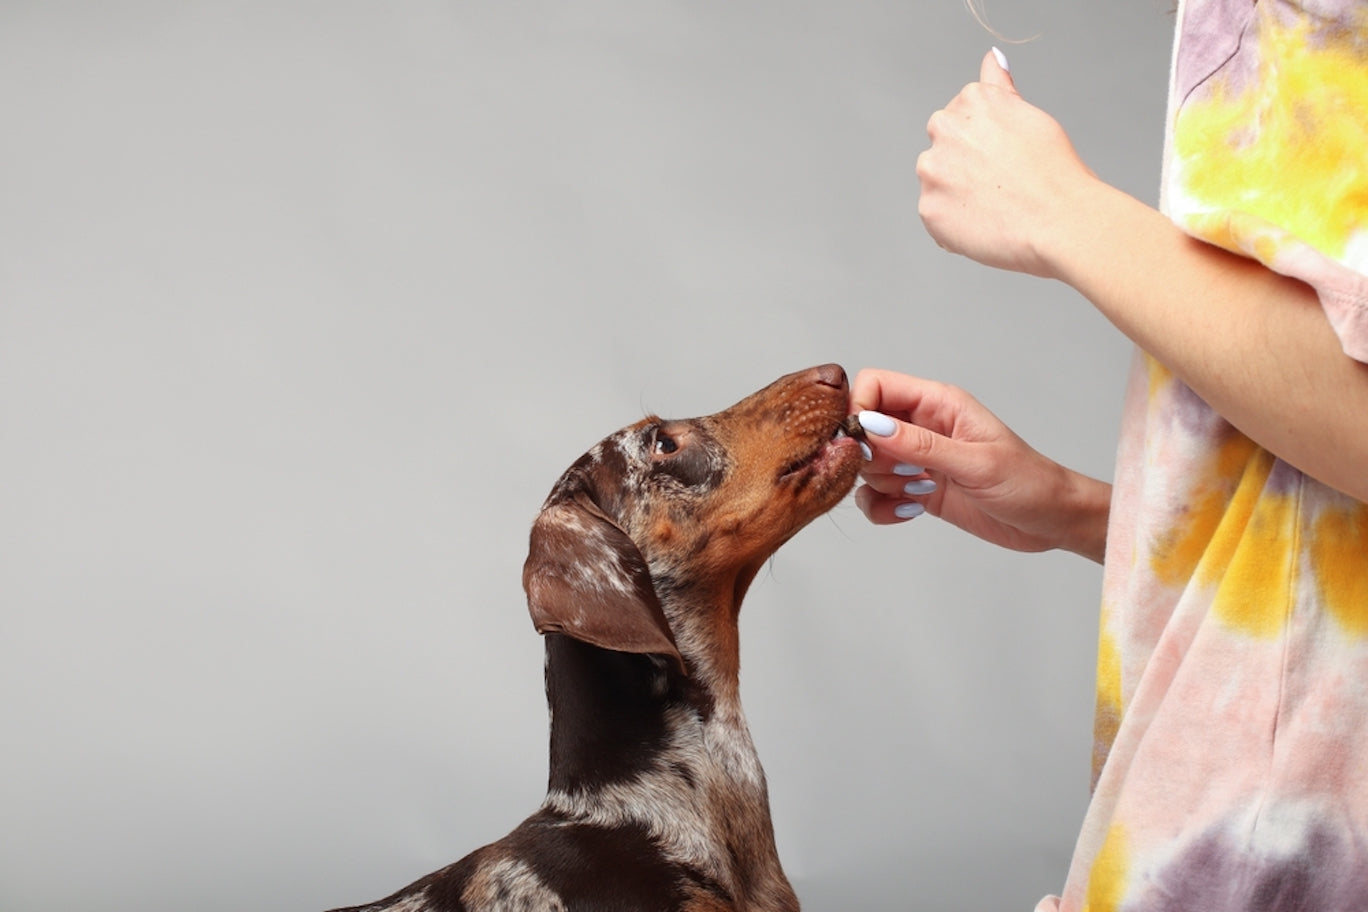 what human medication can dogs take